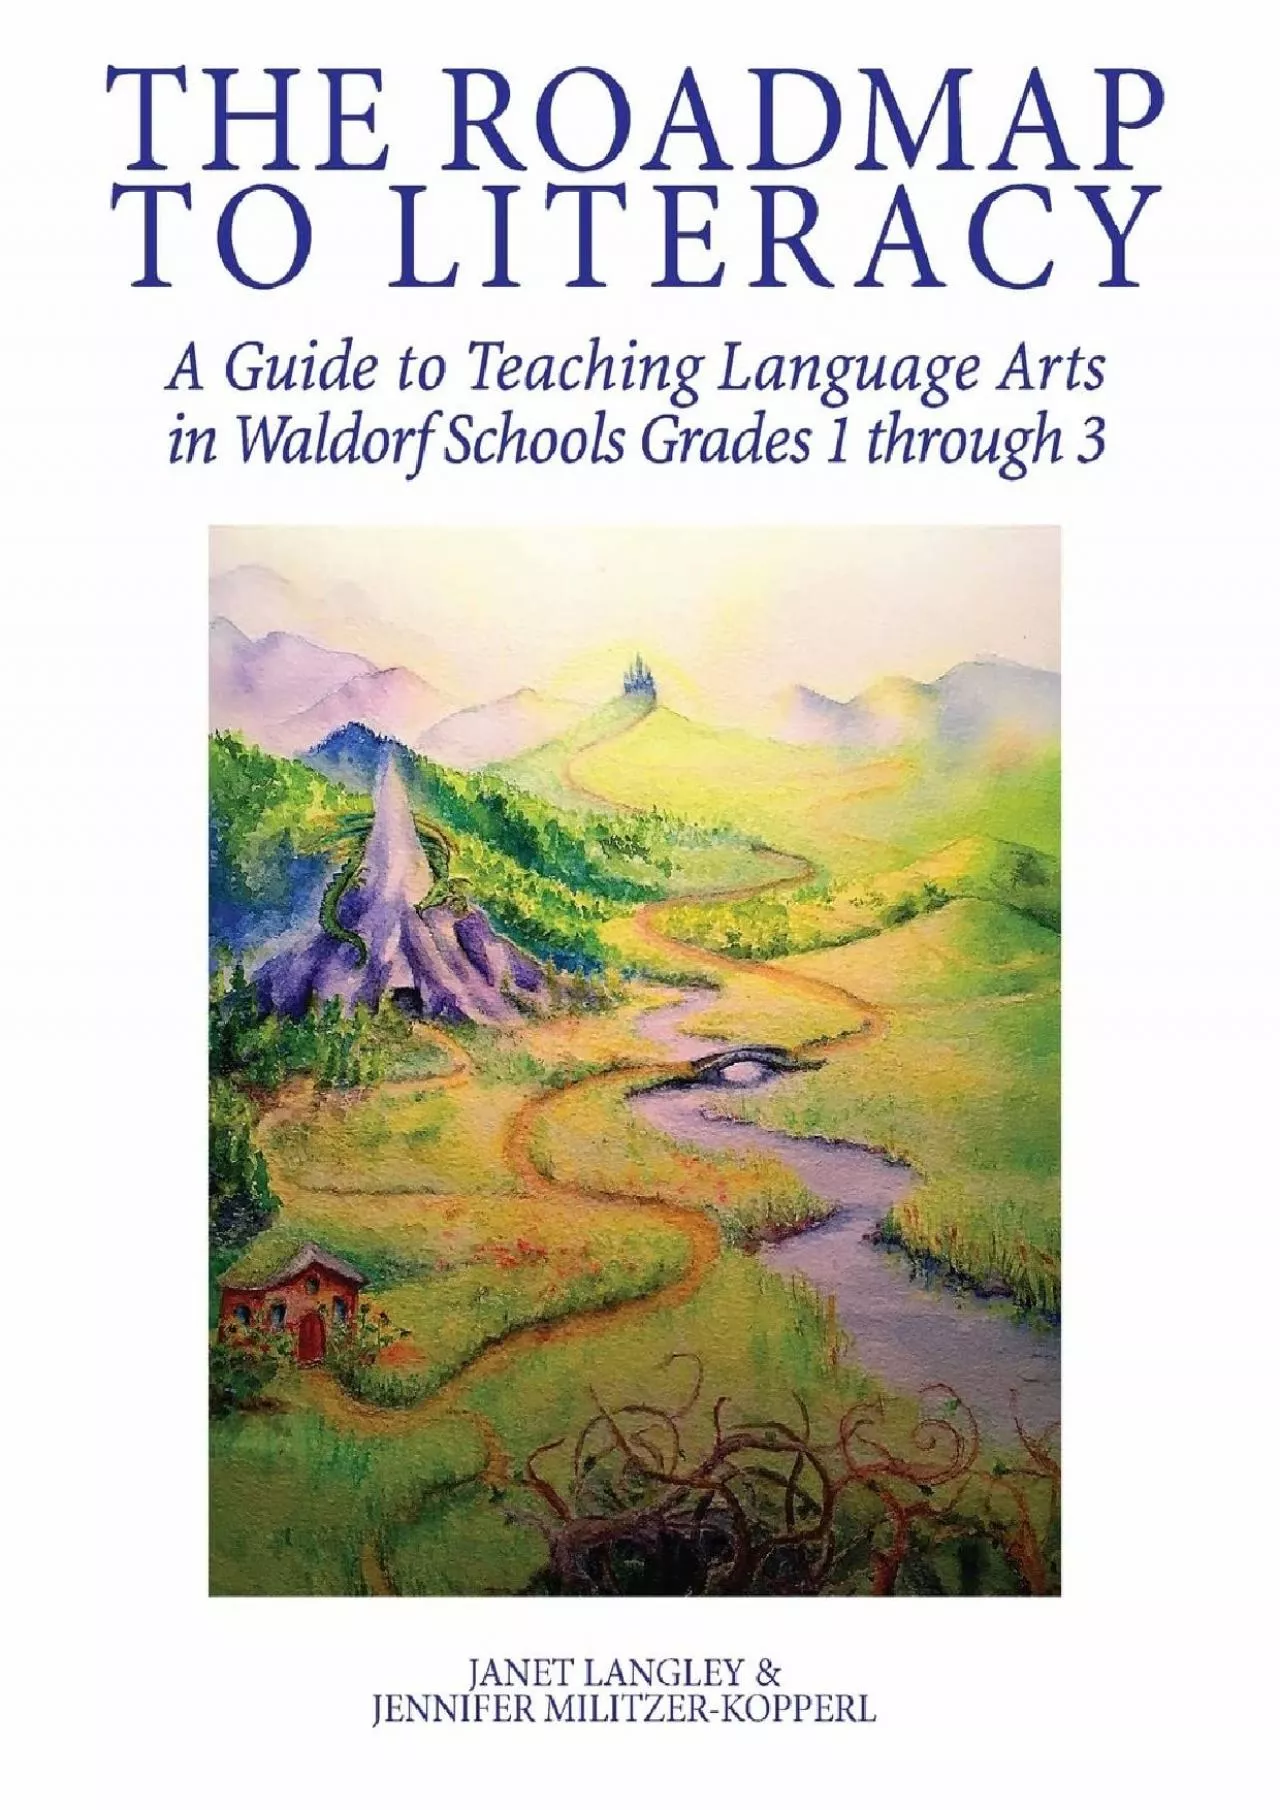 [READ] THE ROADMAP TO LITERACY: A Guide to Teaching Language Arts in Waldorf Schools Grades